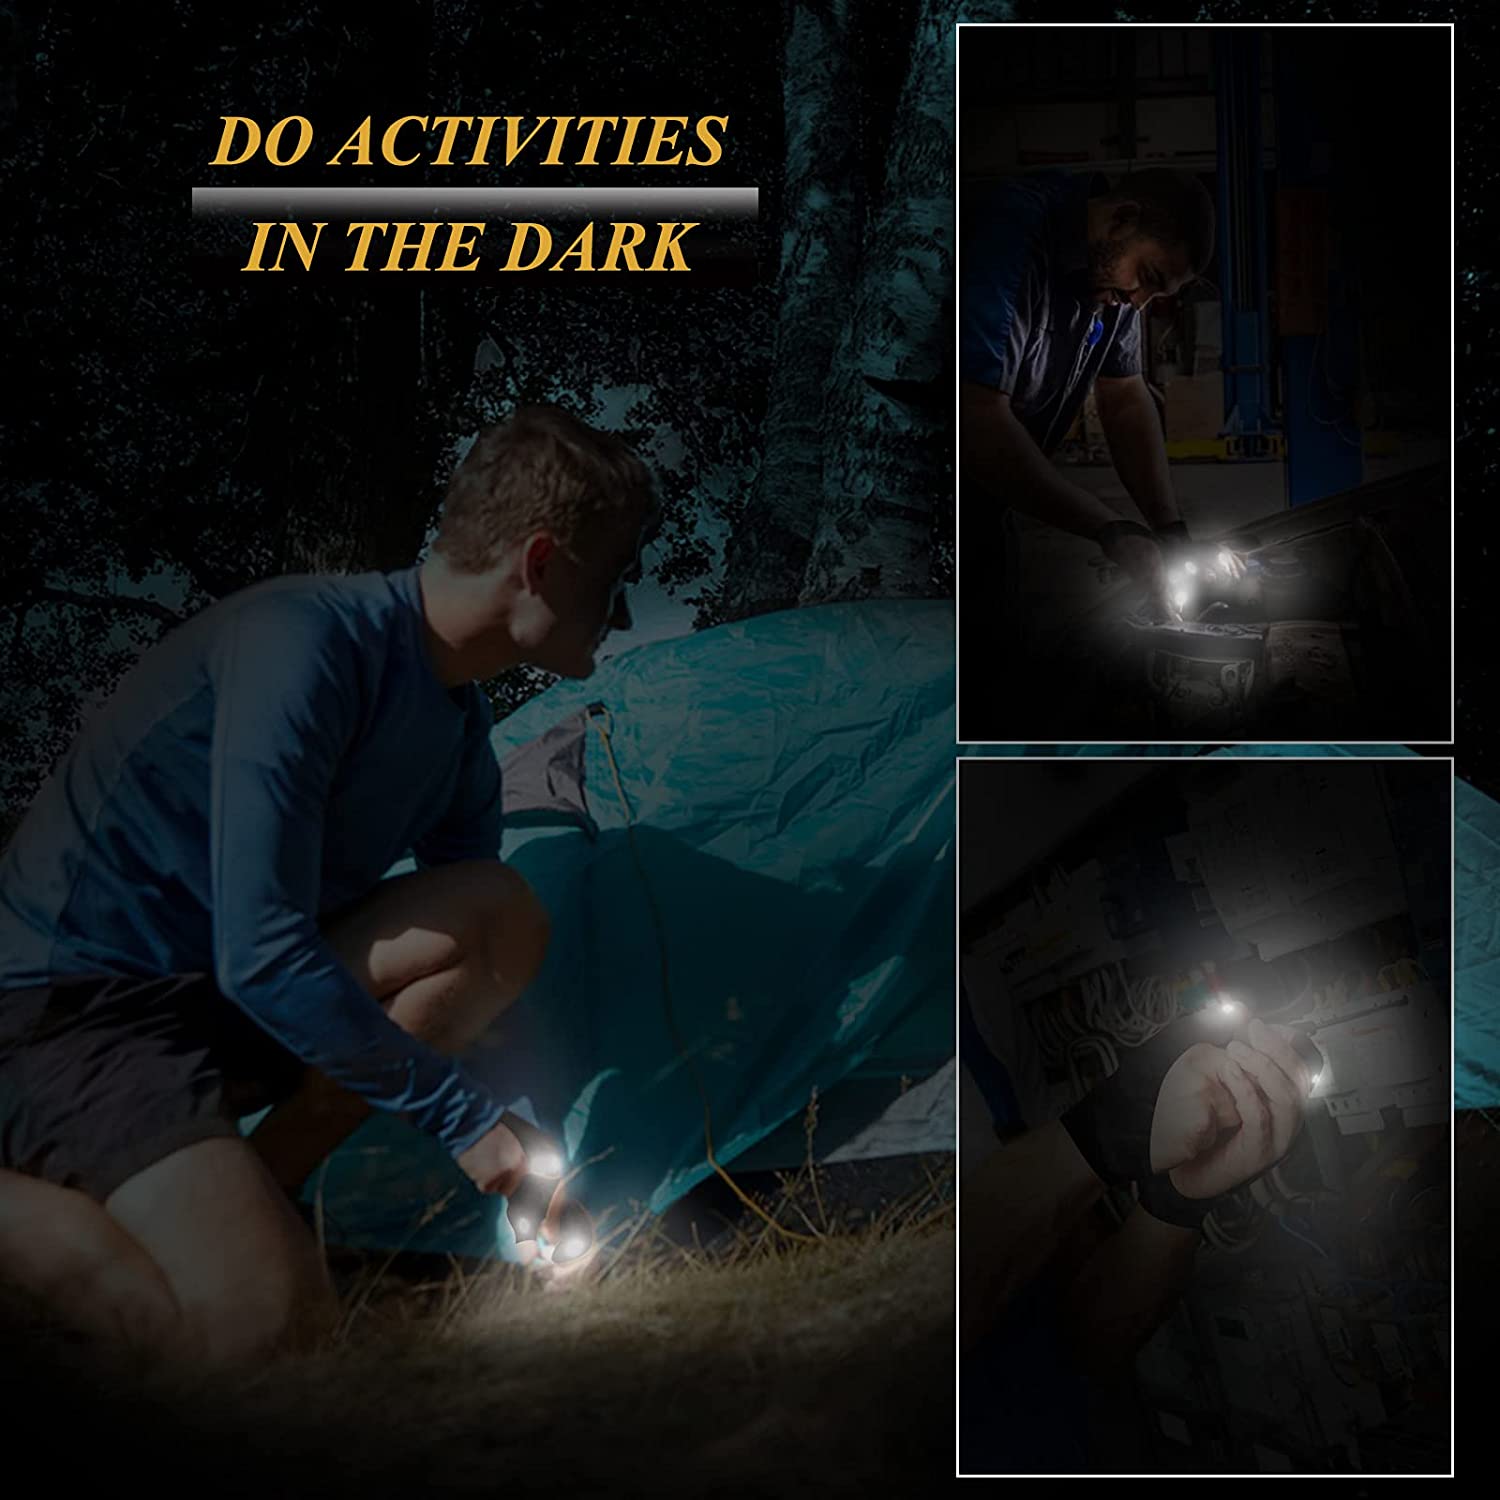 Flashlight gloves LED - Father day gift - with stretchy strap screwdriver - Running fishing camping hiking in dark places